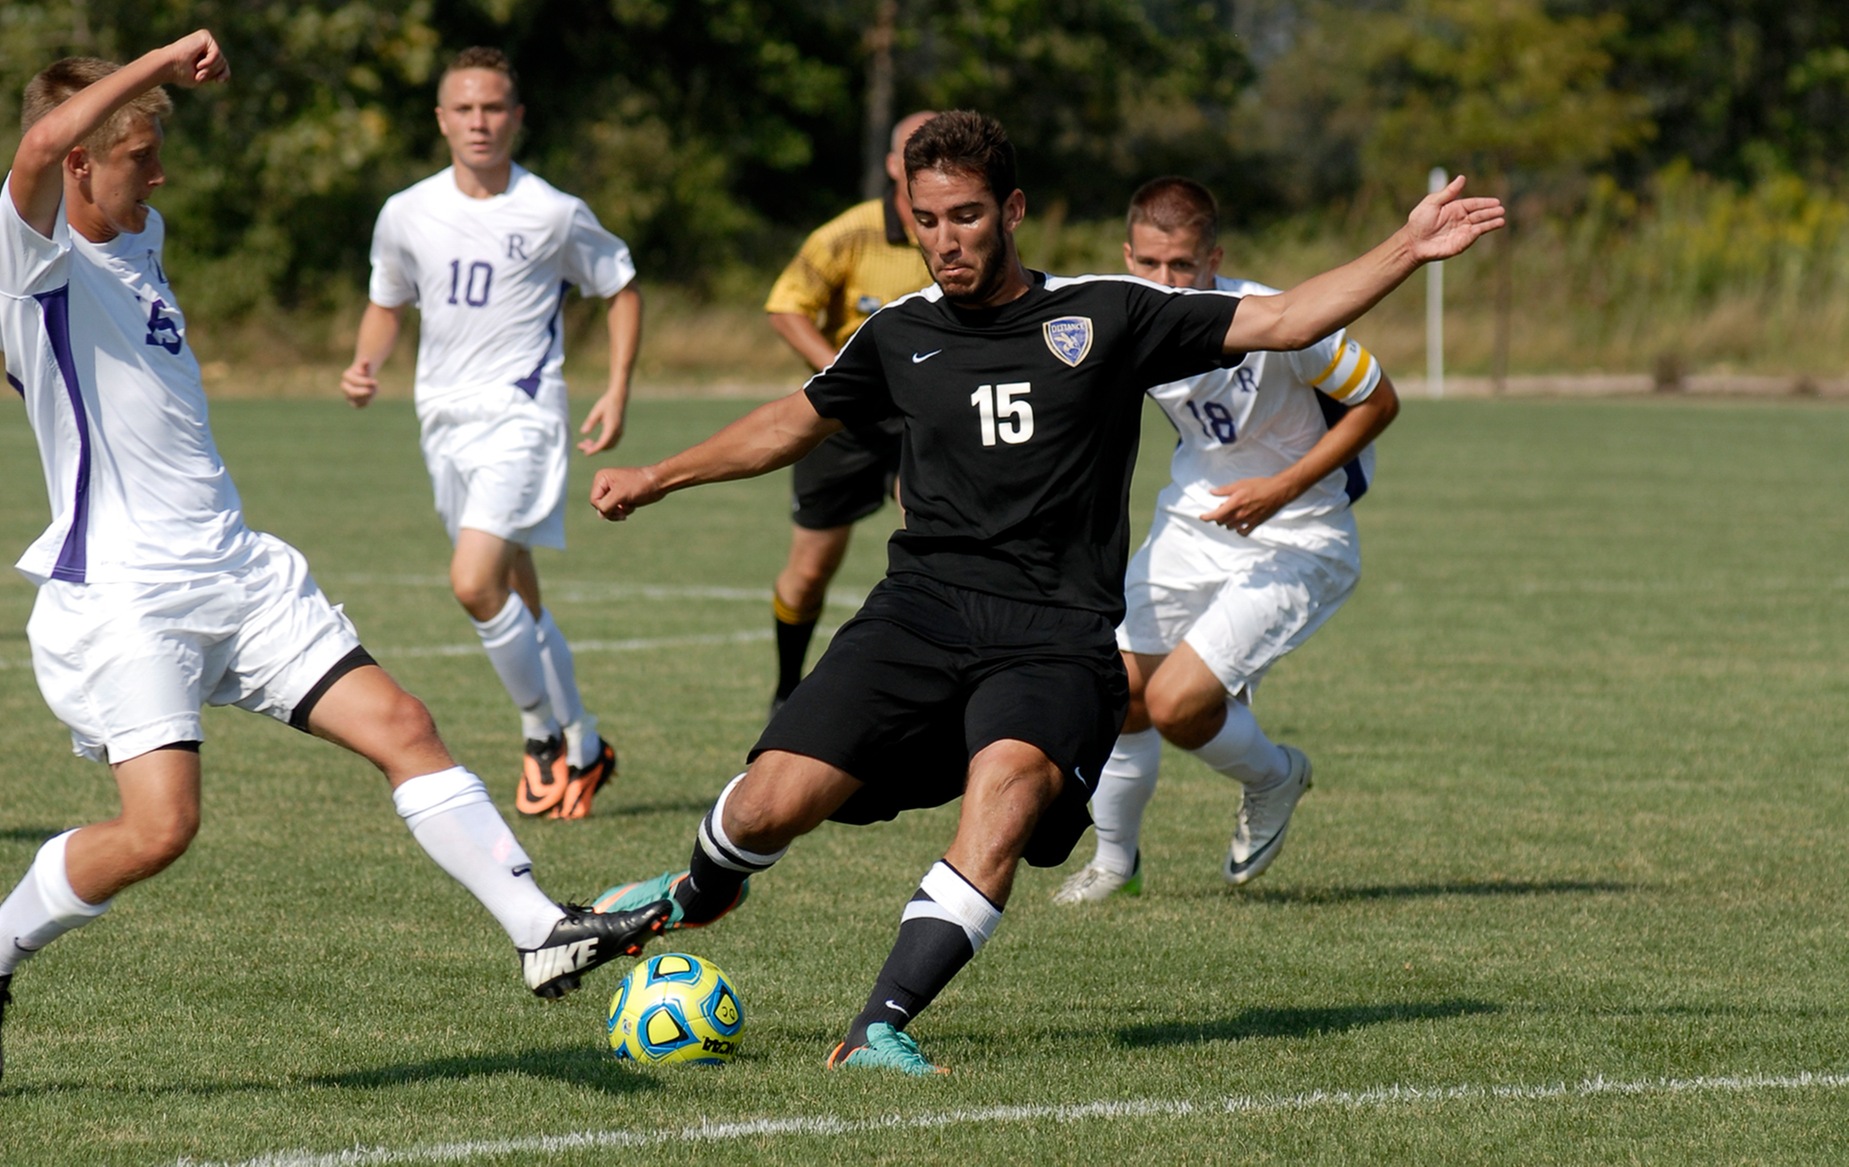 DC tops MSJ to win conference opener, 1-0